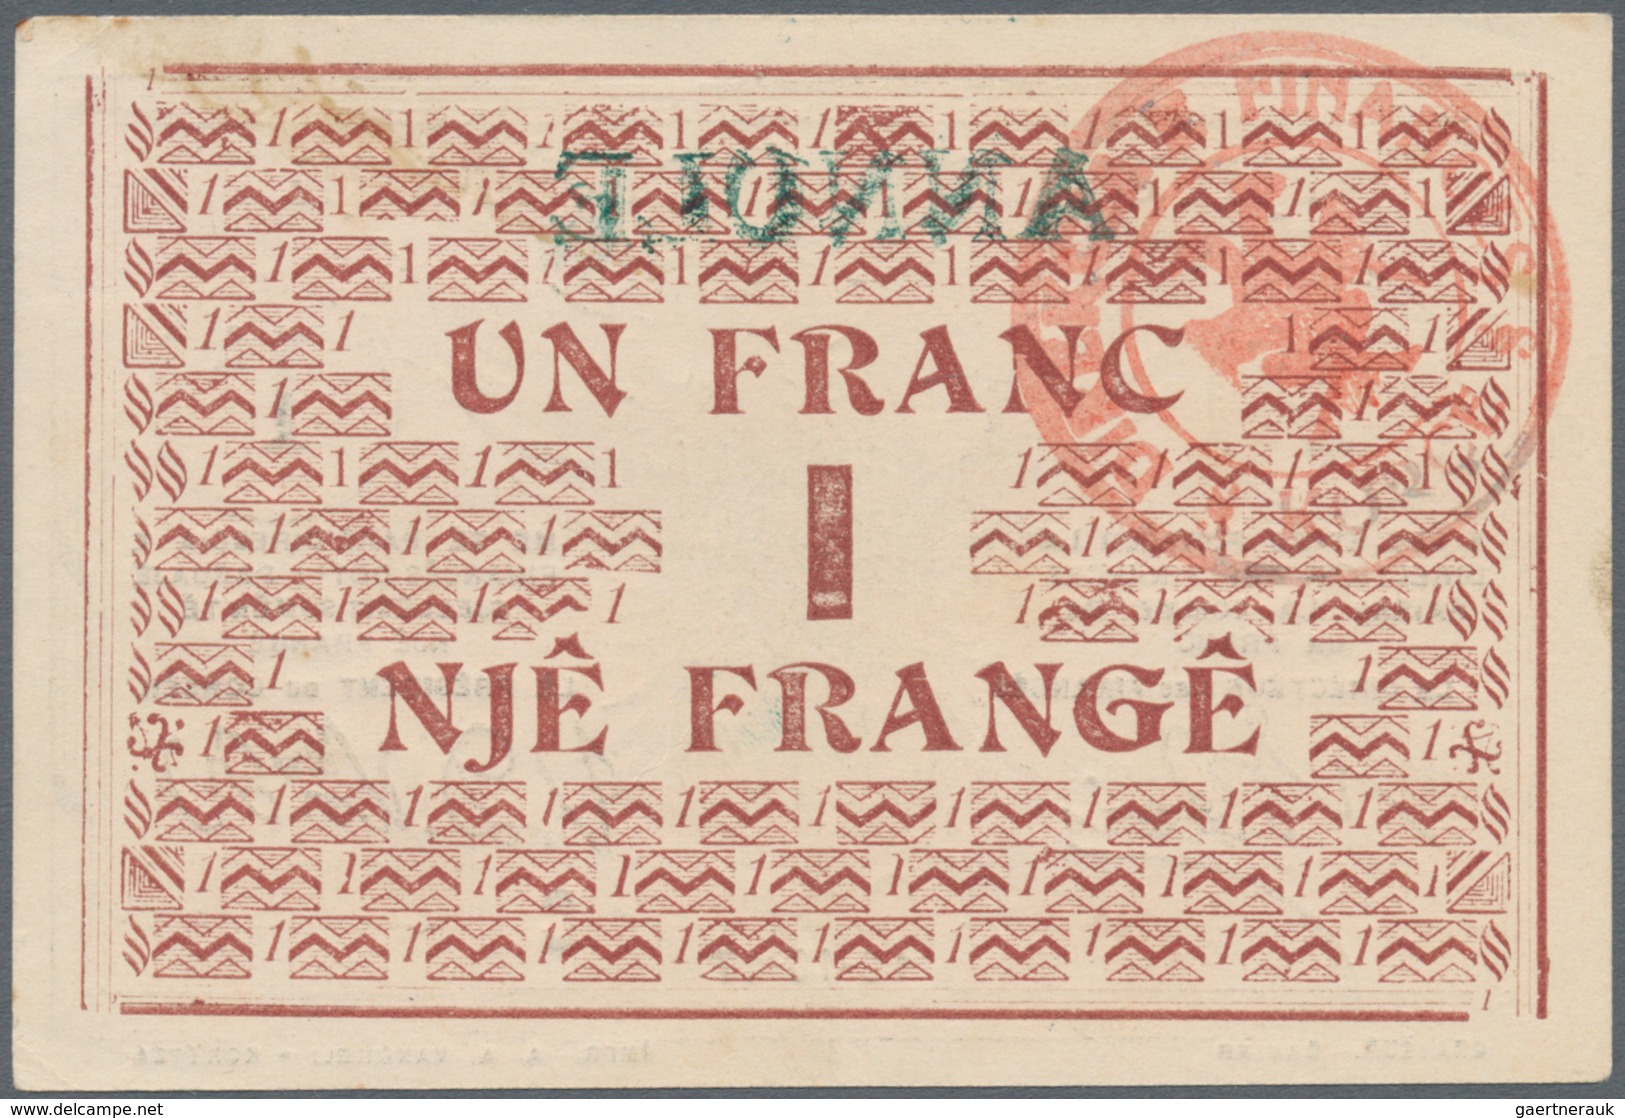 Albania / Albanien: 1 Frang 10.10.1917 P. S146 With Green Overprint Annule At Upper Border On Front, - Albanie